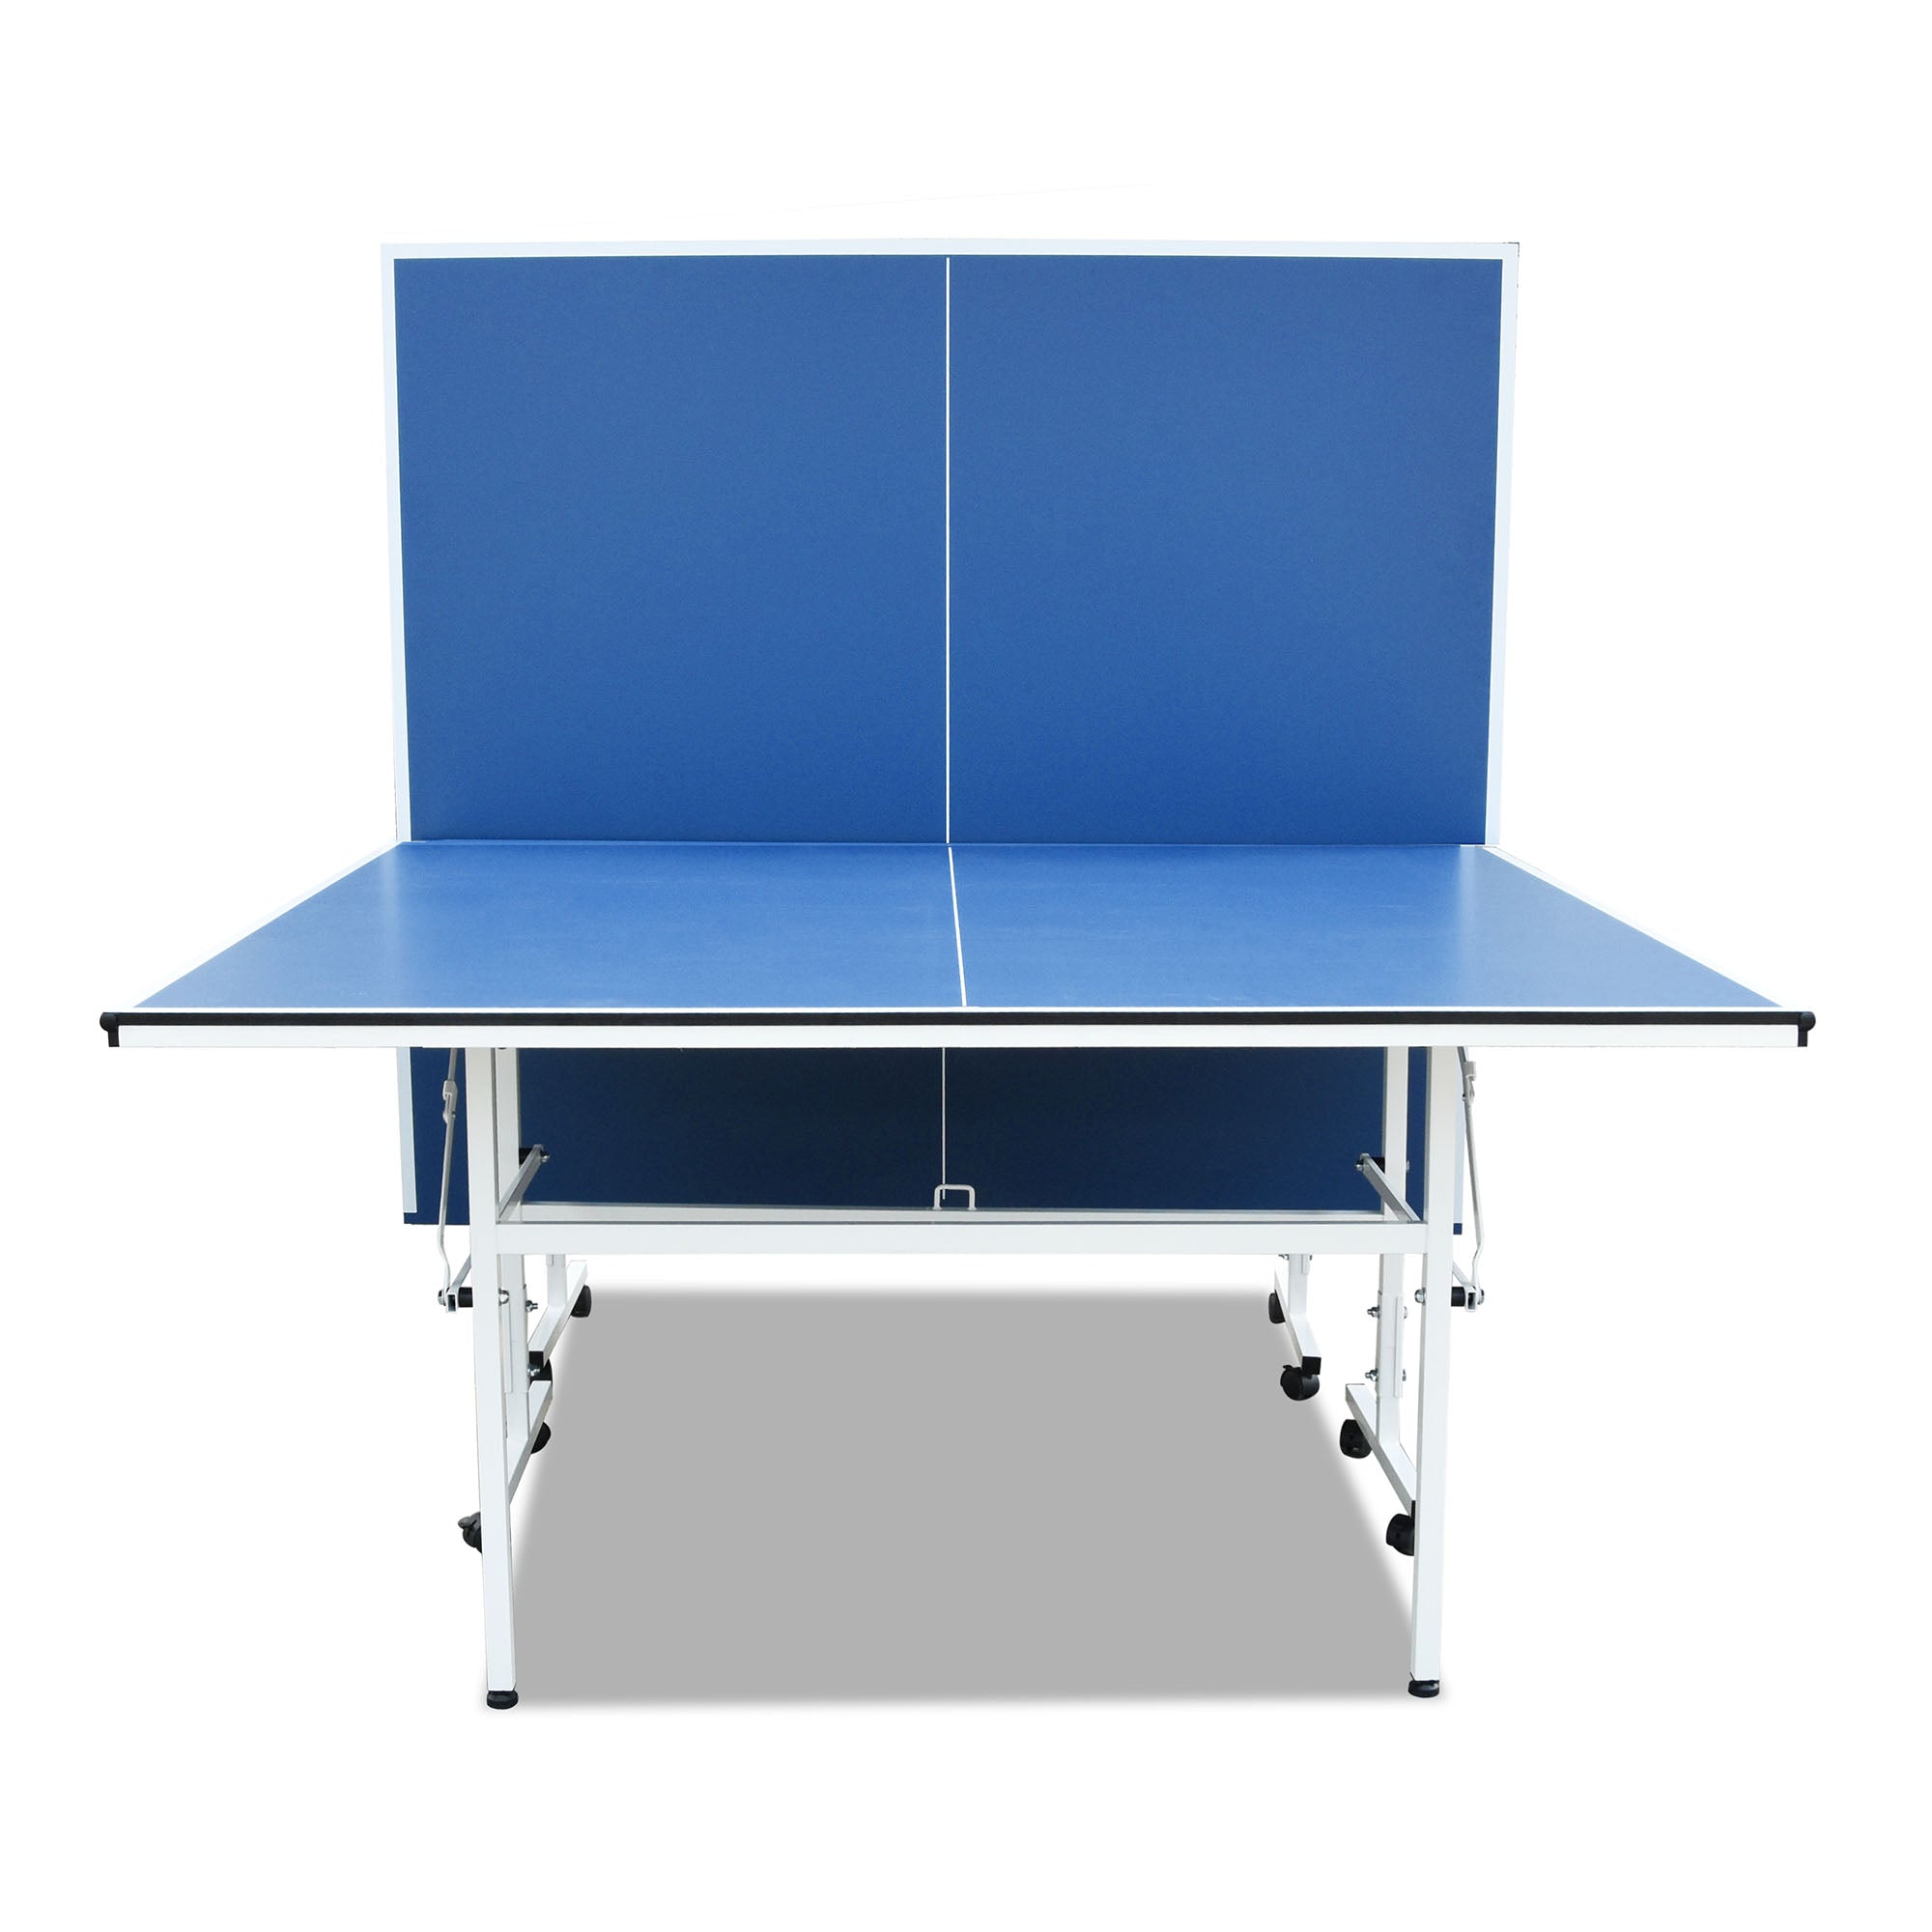 DOUBLE HAPPINESS 13 Indoor Rollaway Fiberboard Table Tennis With Accessories Ping Pong Table - Blue